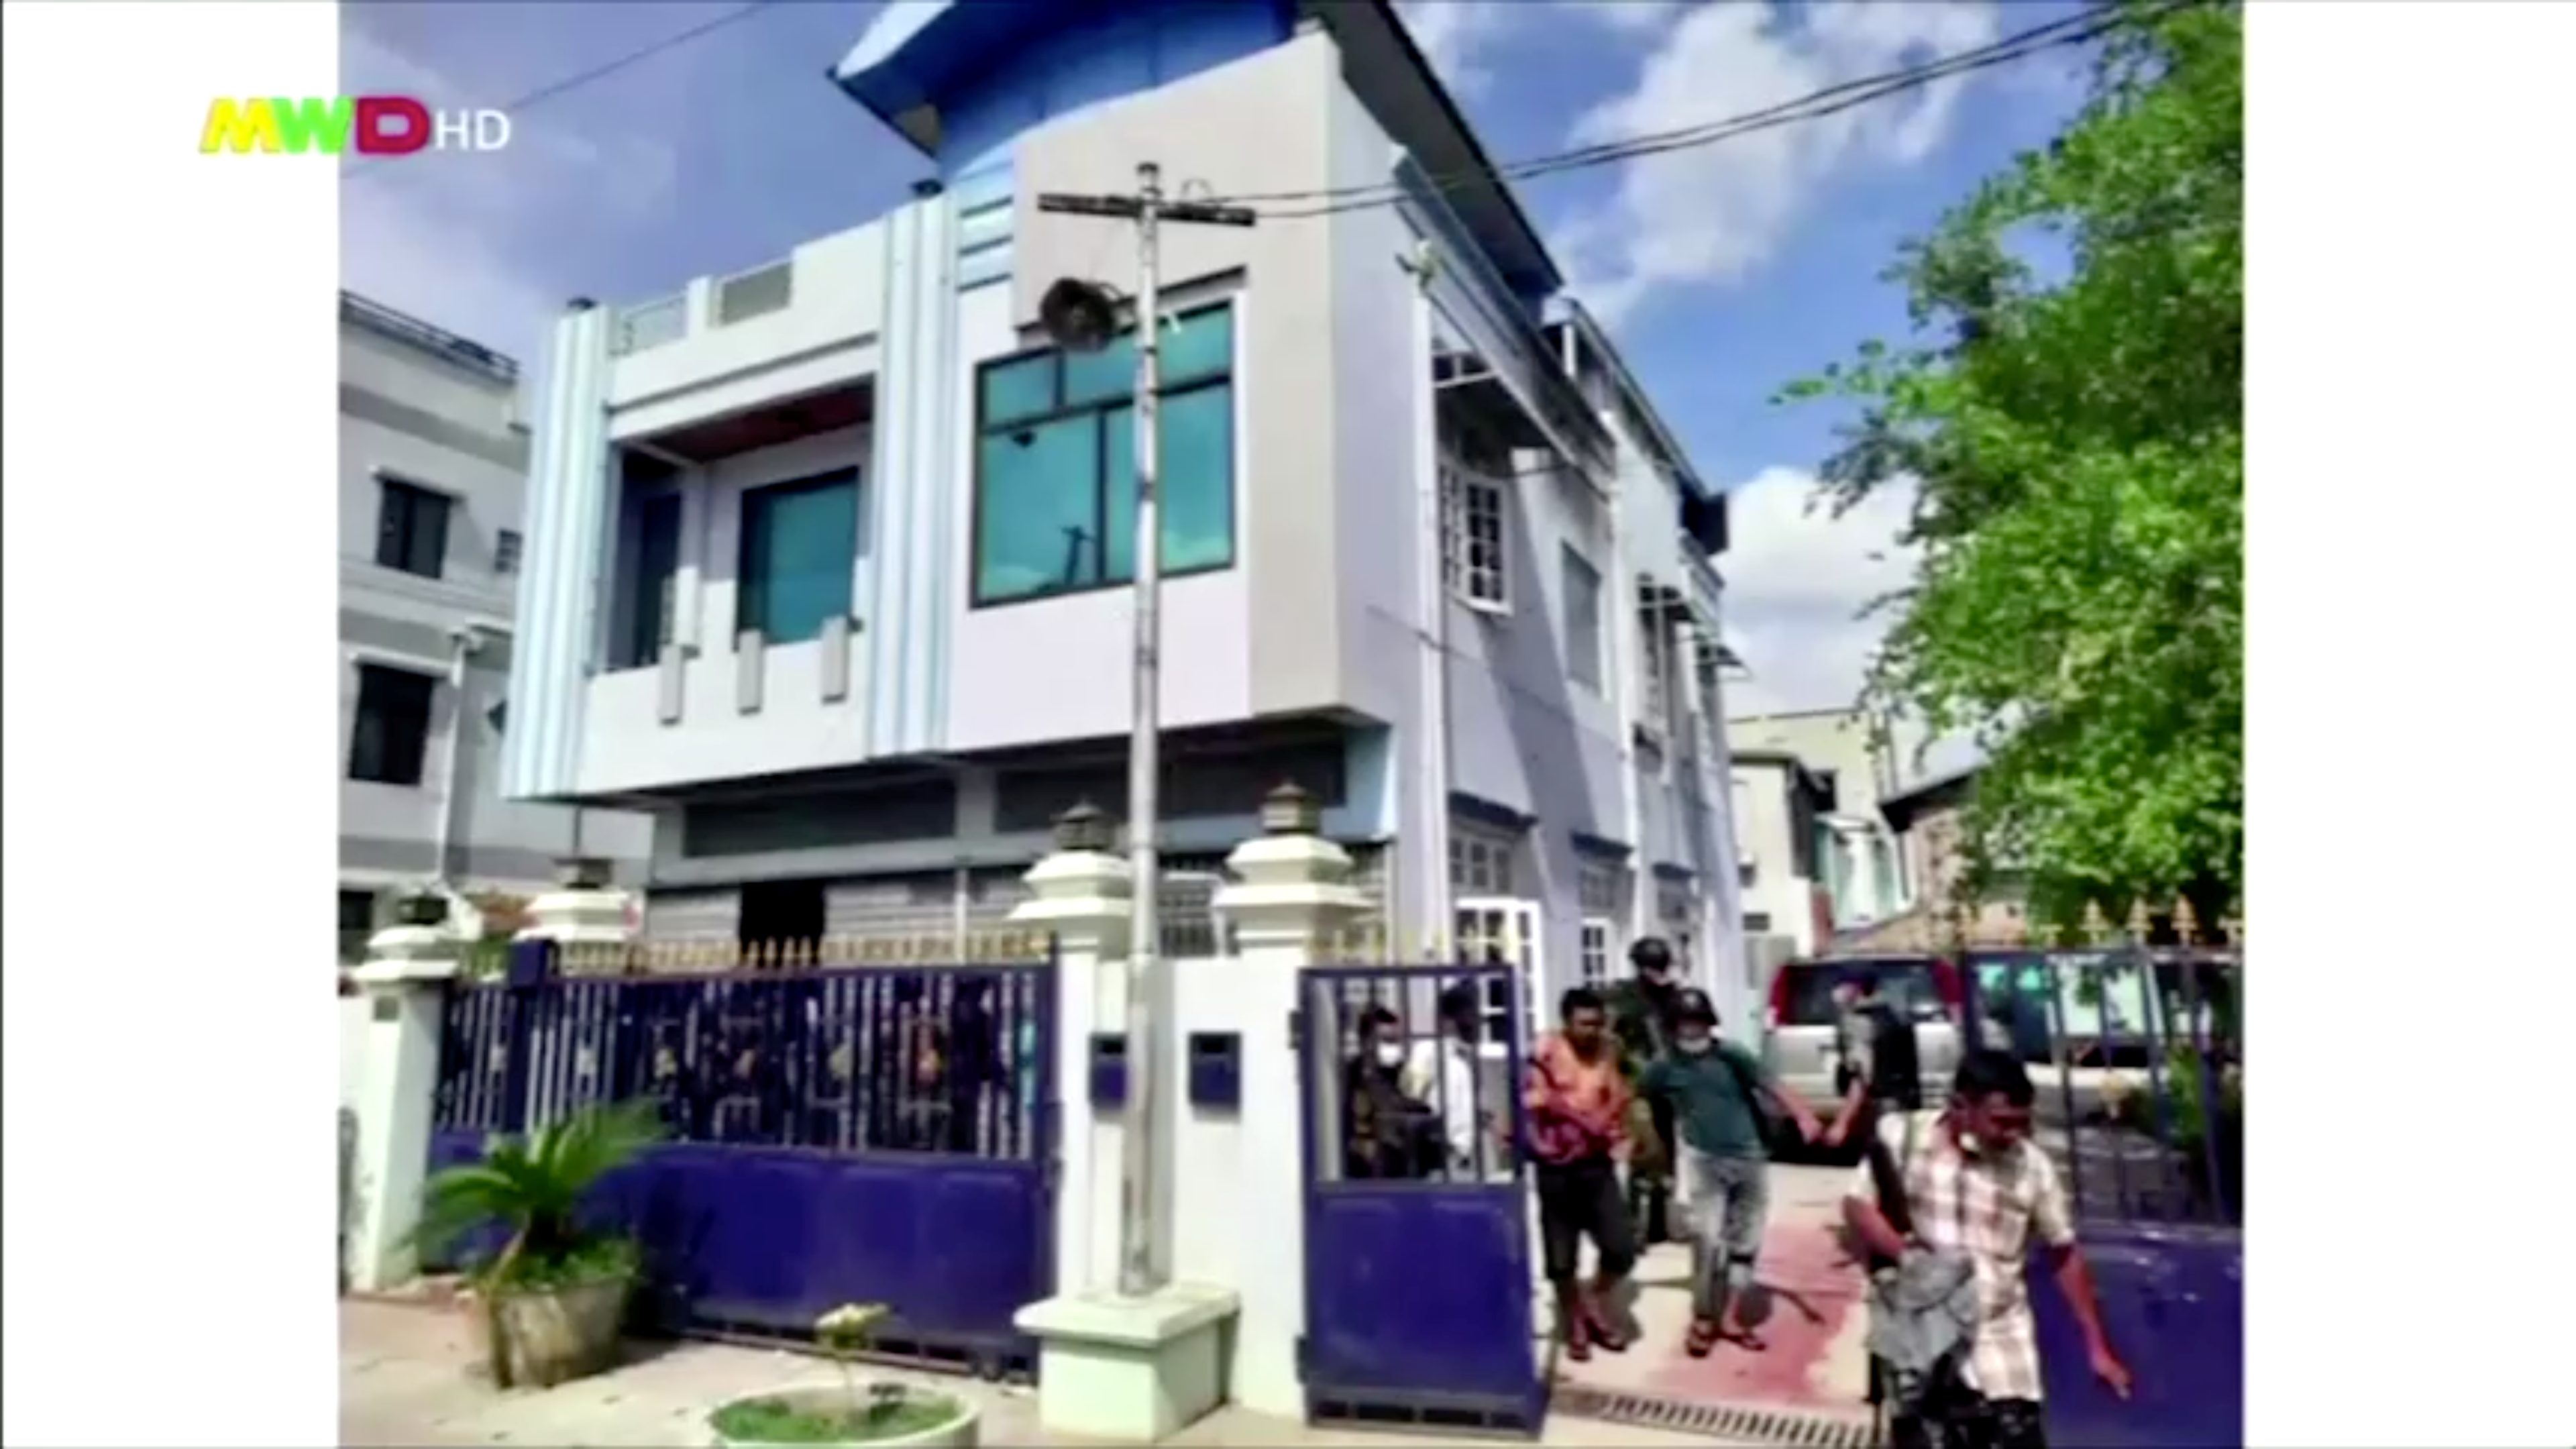 People walk out from a house believed to have been raided by security forces, in Mandalay